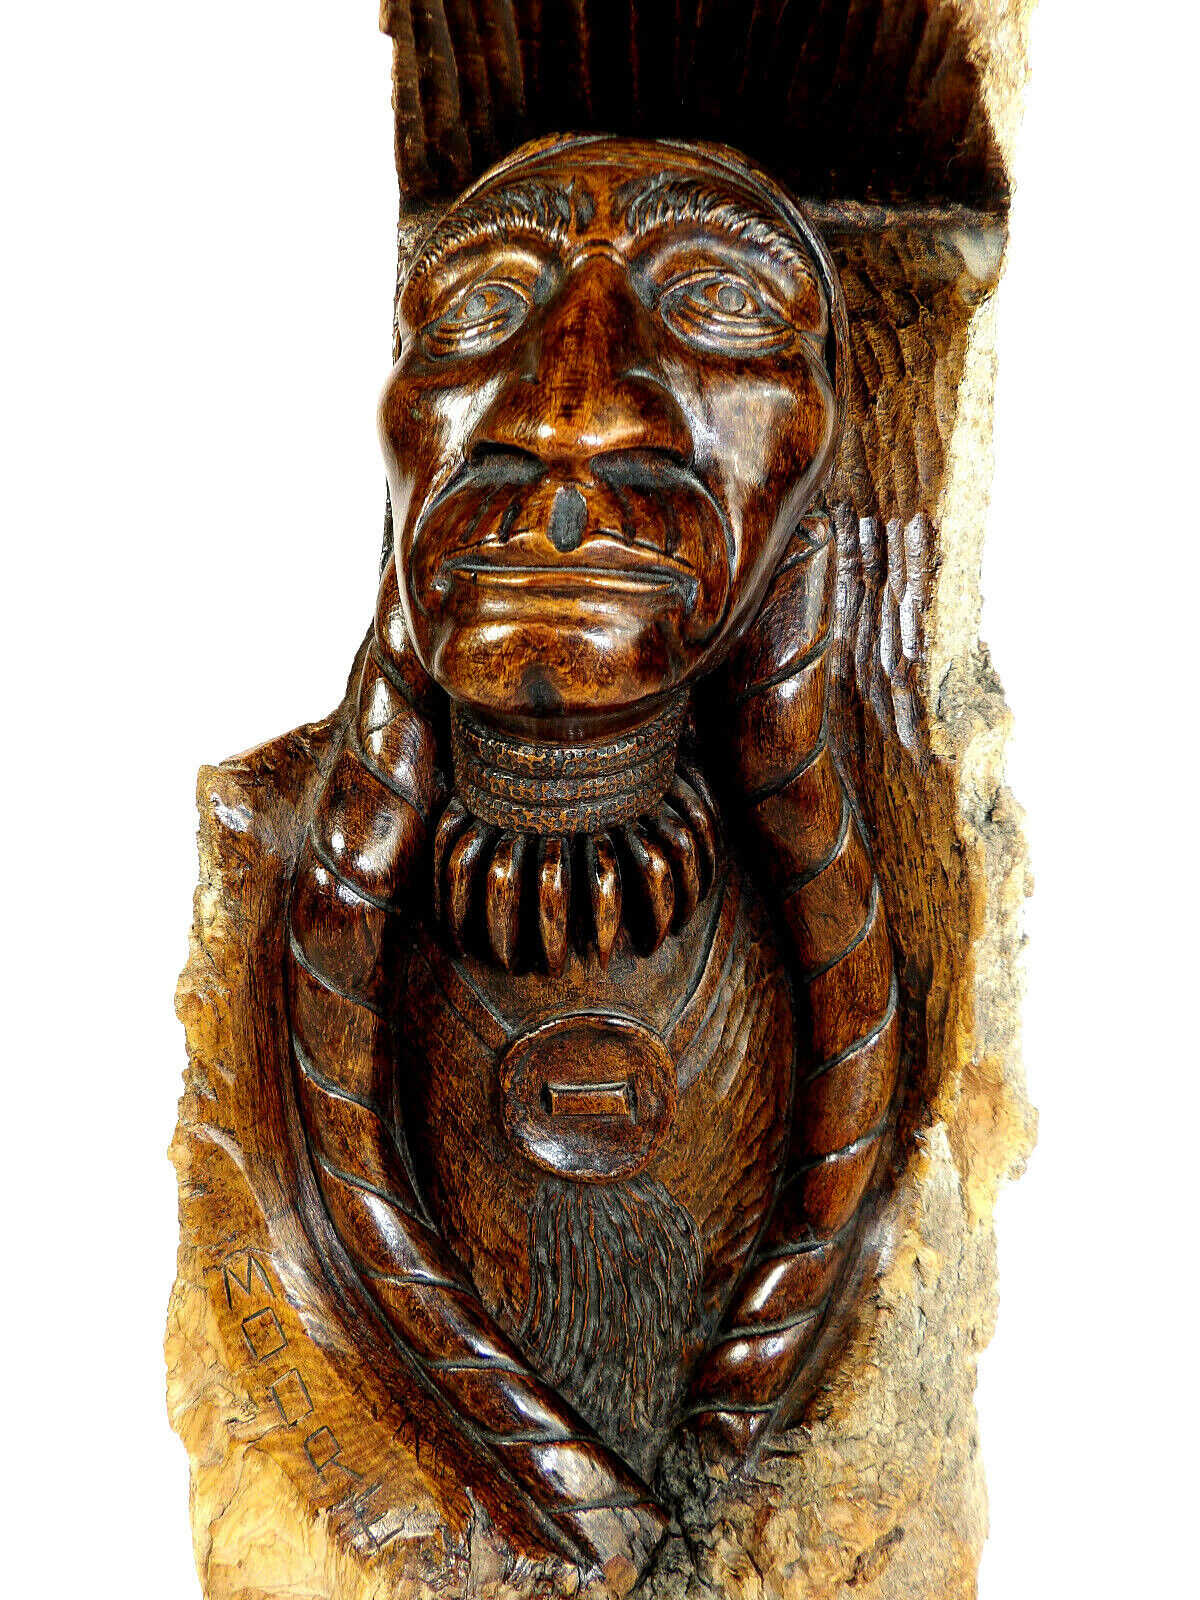 Pacific NW Native American Carved Wood Statue Bust Signed Jack Moore 89\' 14\